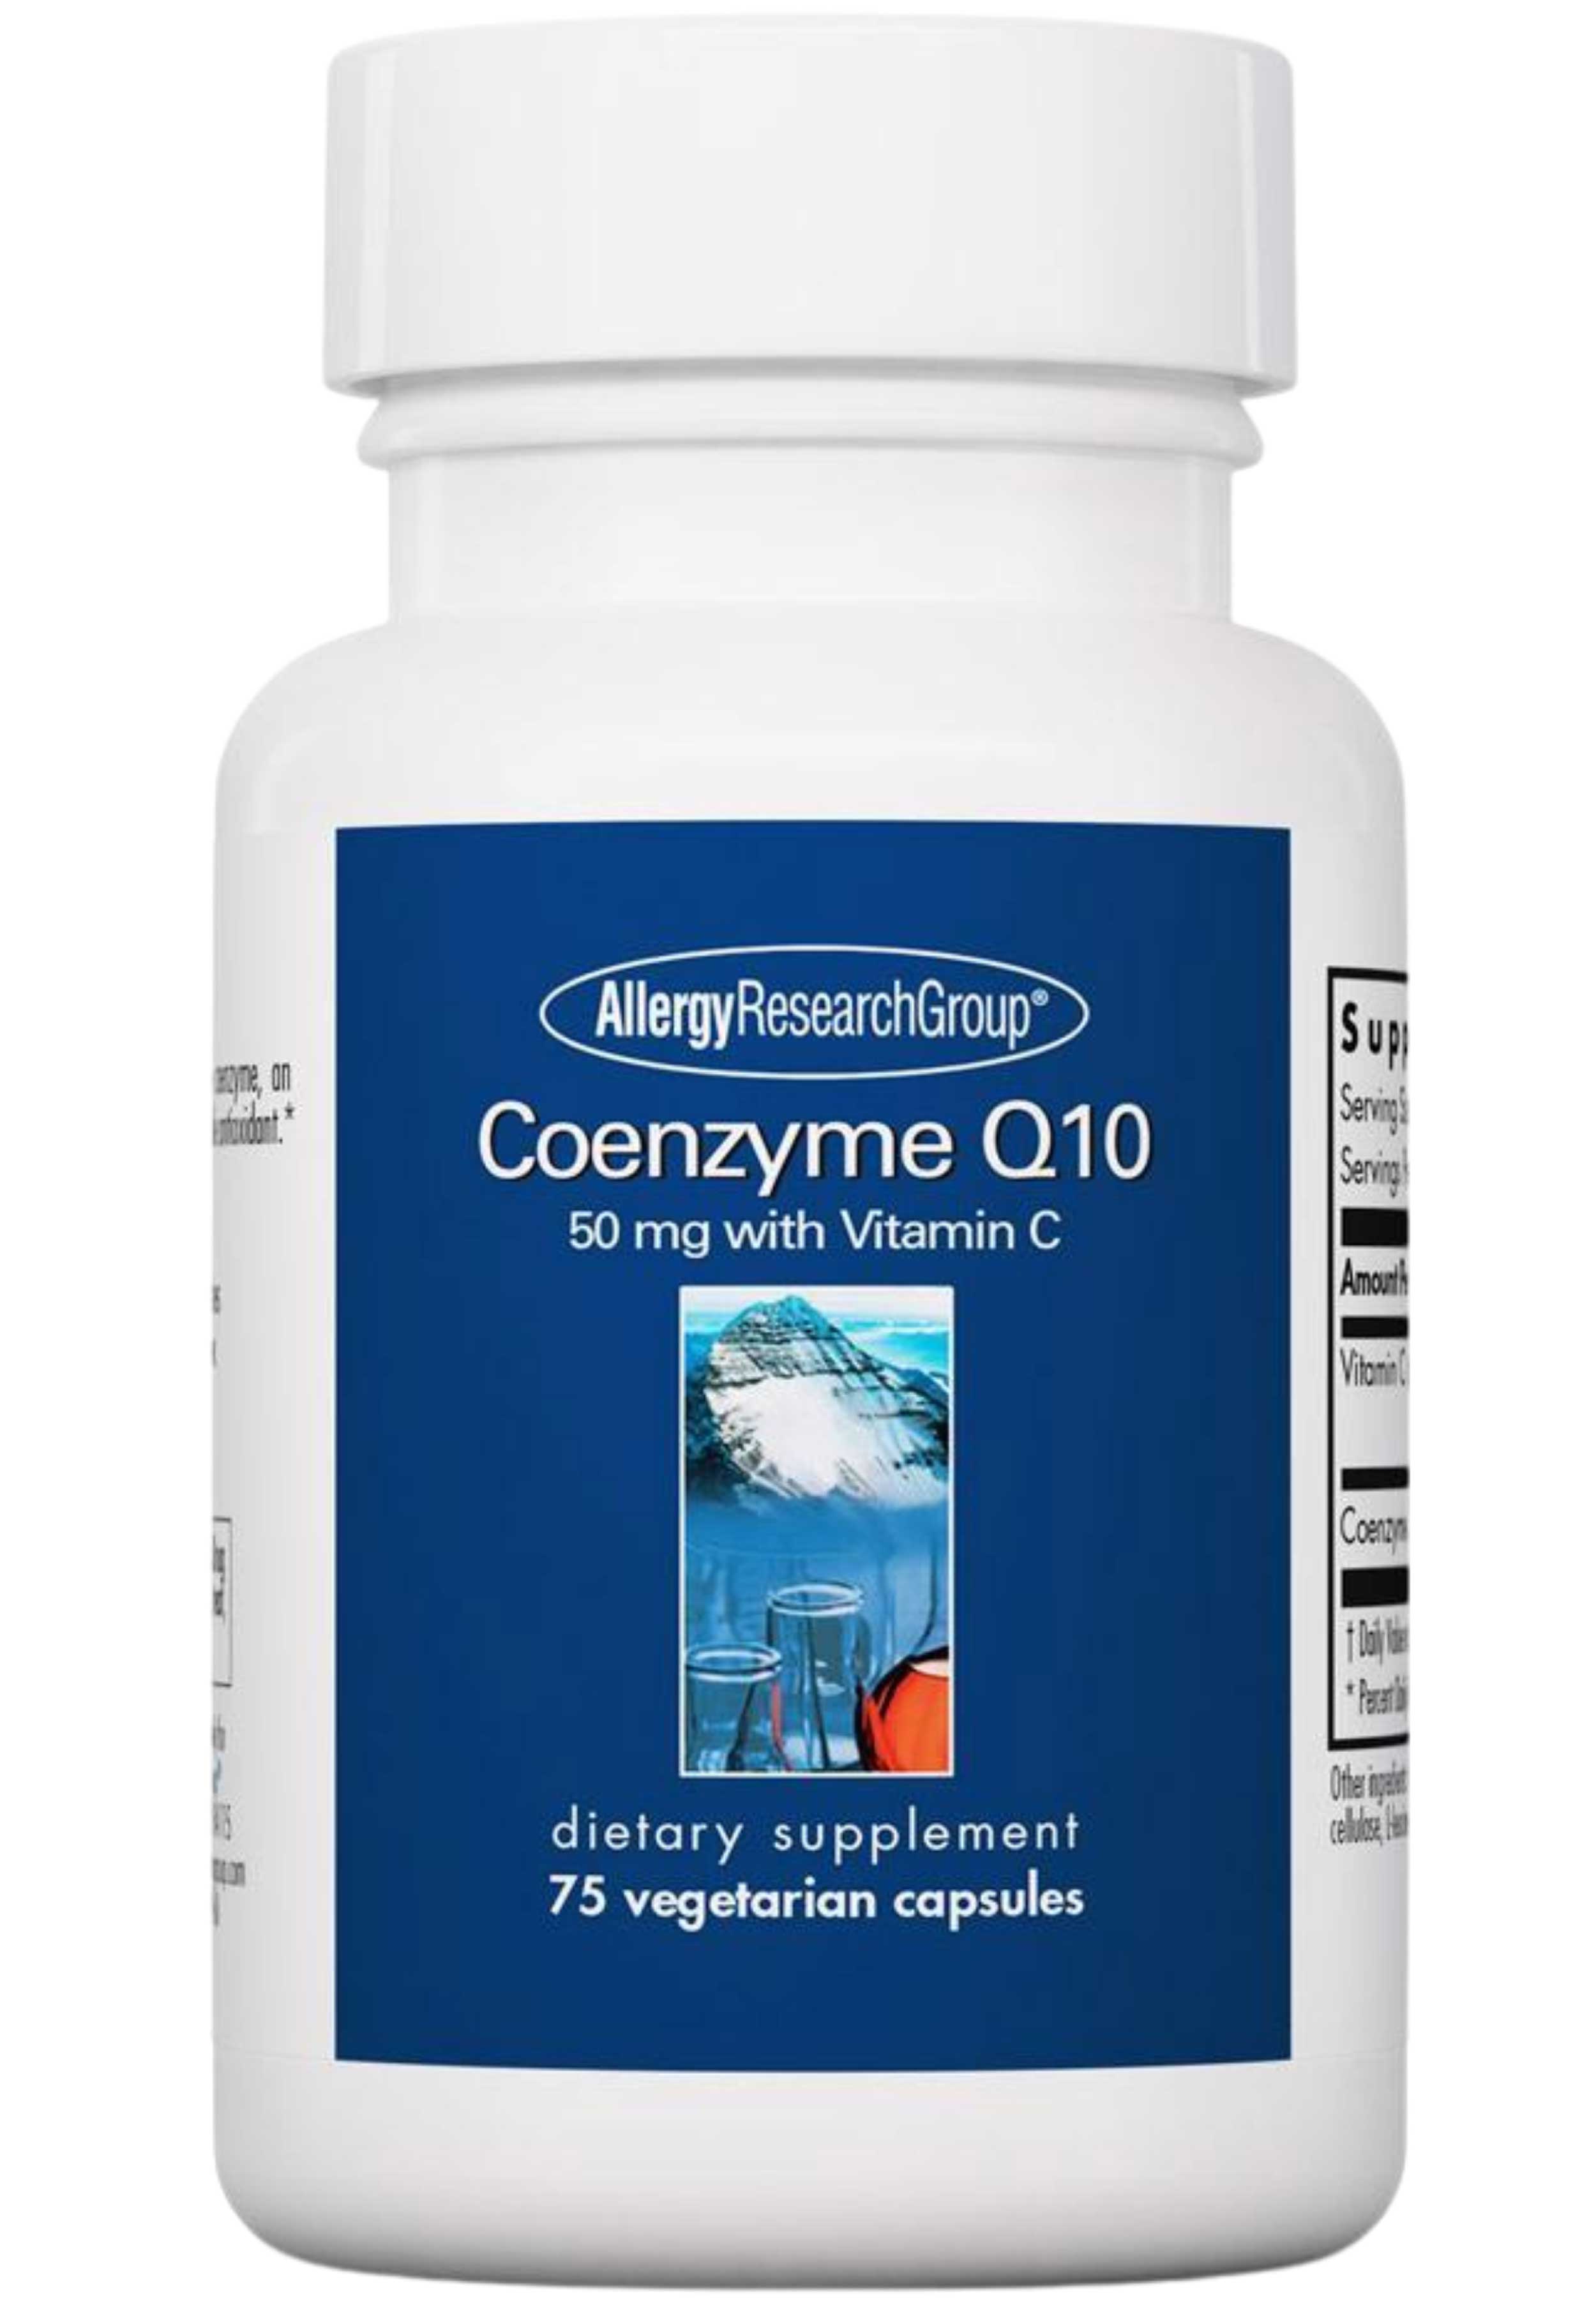 Allergy Research Group Coenzyme Q10 50 mg